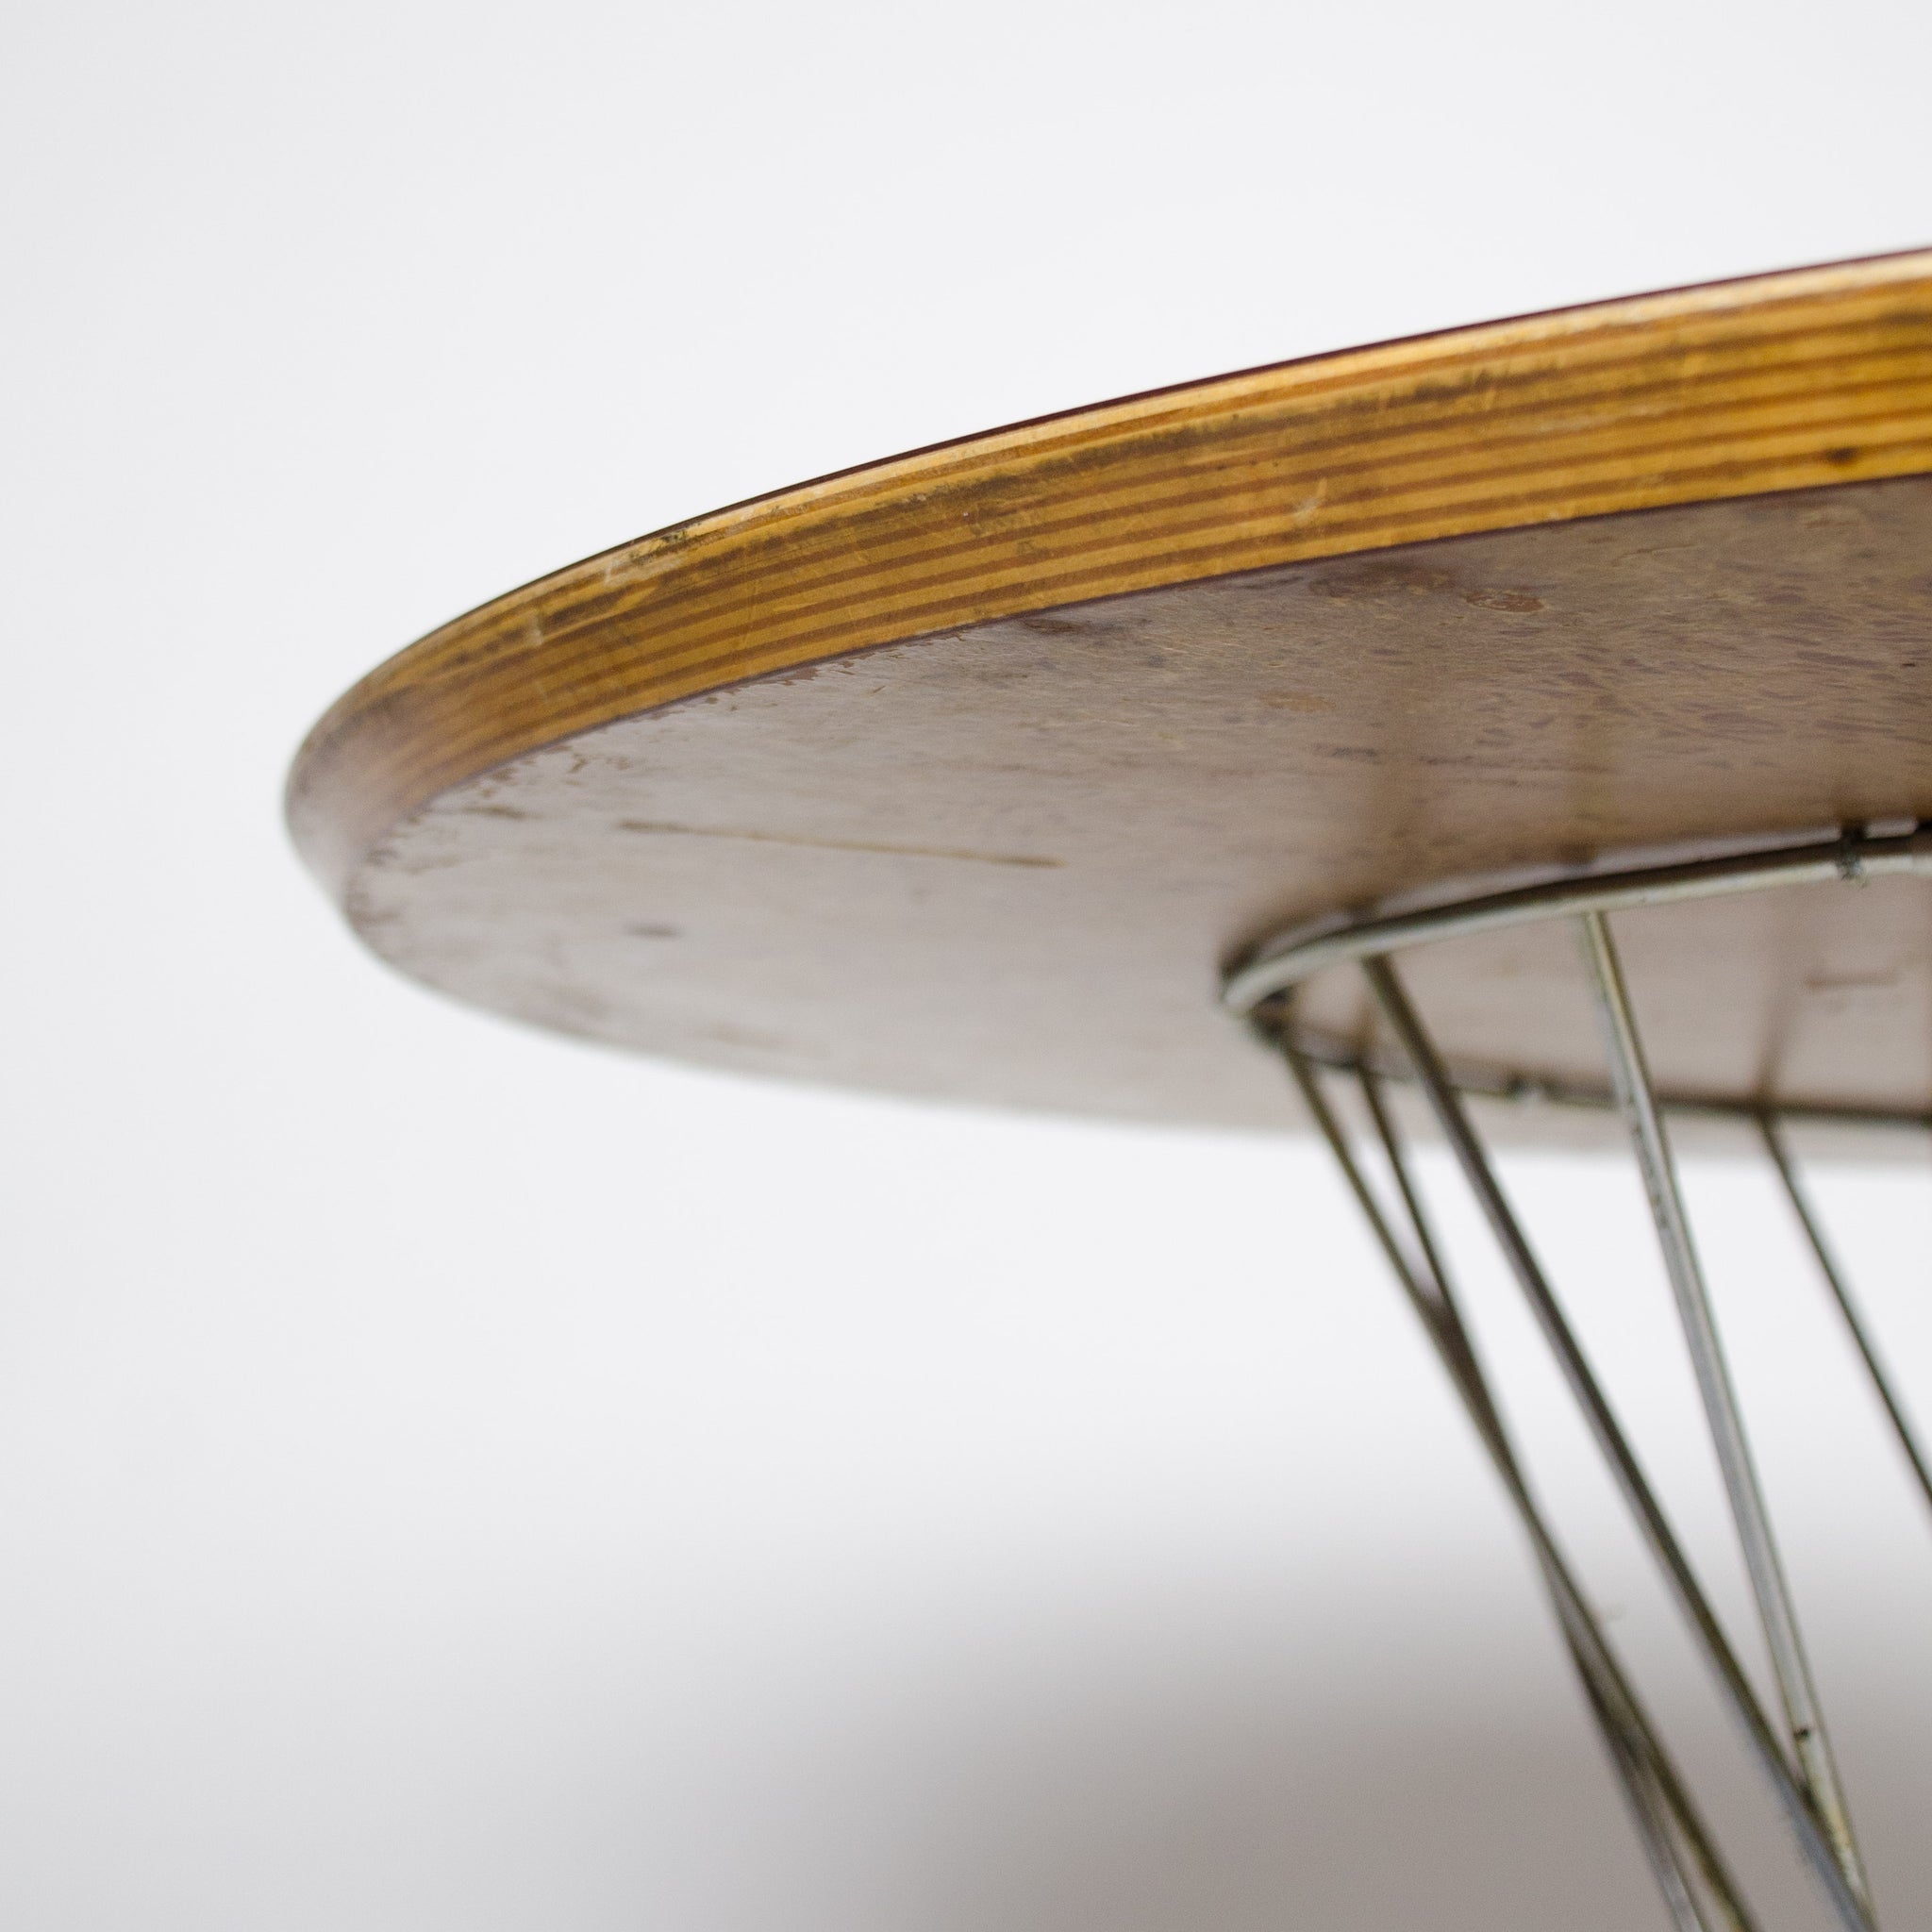 SOLD 1950's Rare Isamu Noguchi For Knoll Associates Original Cyclone Wire Dining Table